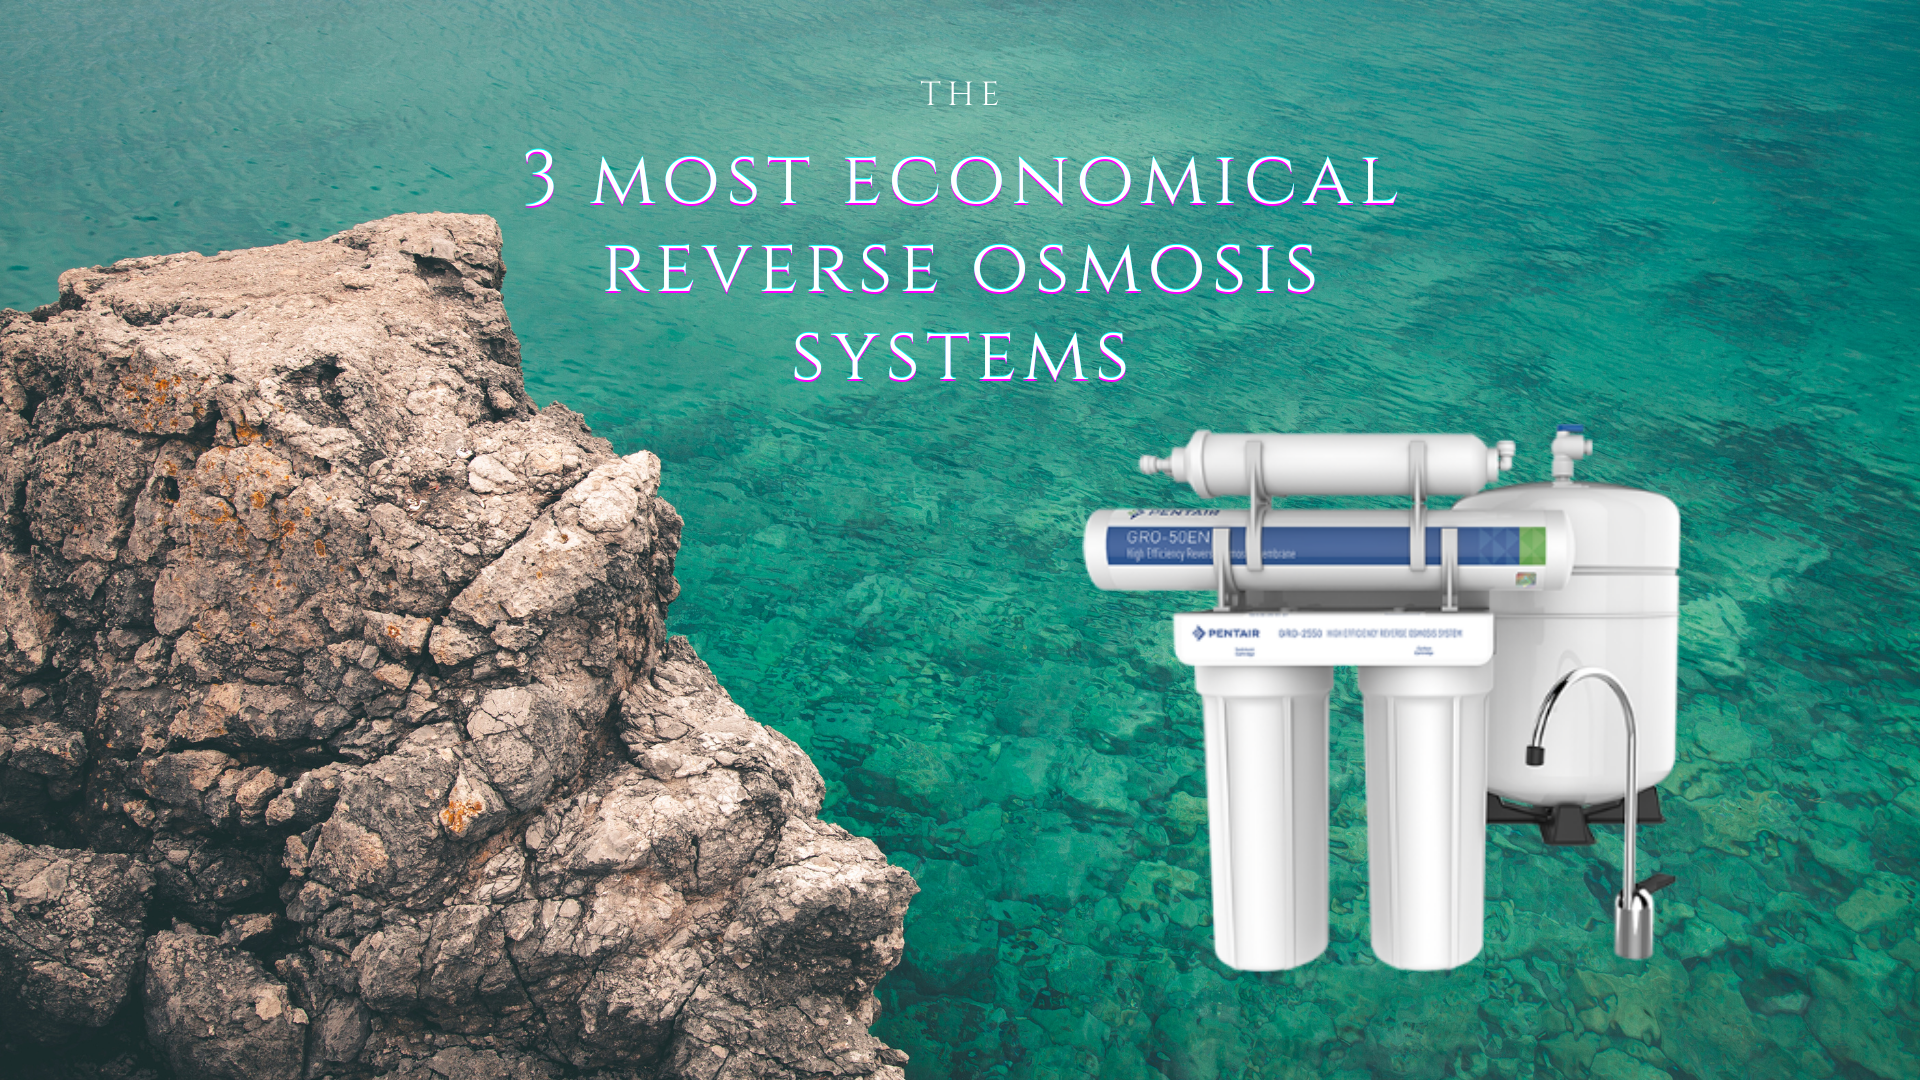 The 3 Most Economical Reverse Osmosis Systems